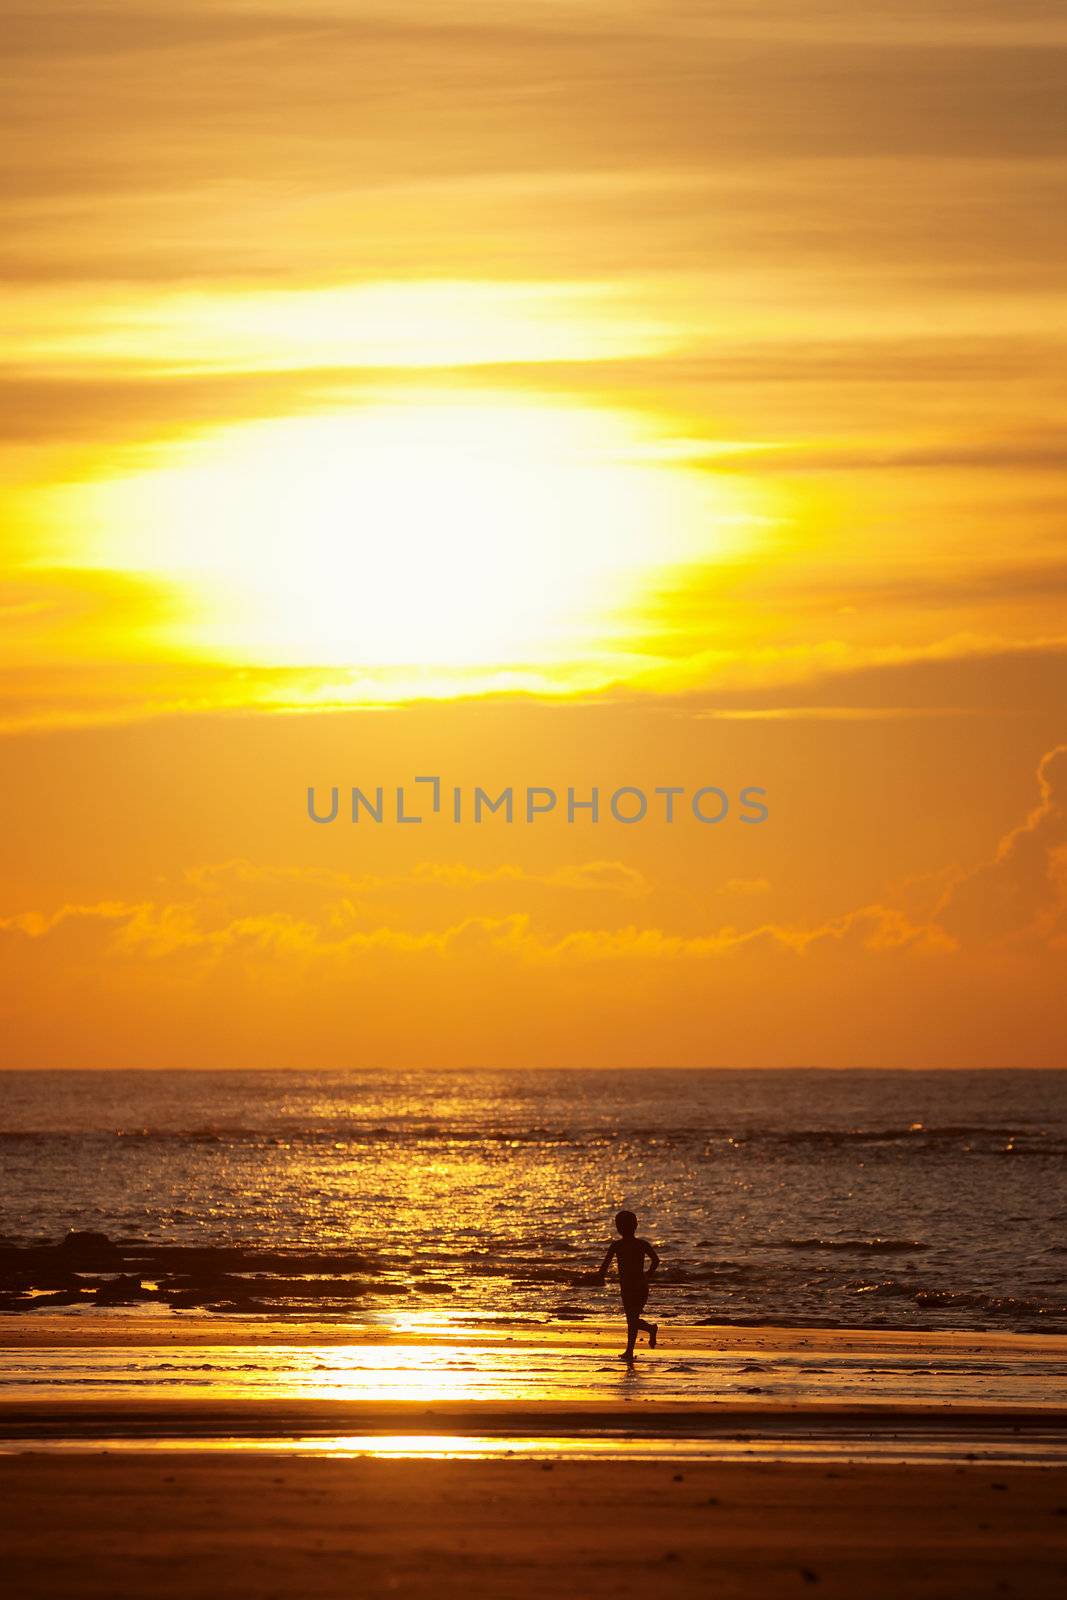 Sunset on a tropical beach and silhouette of a kid